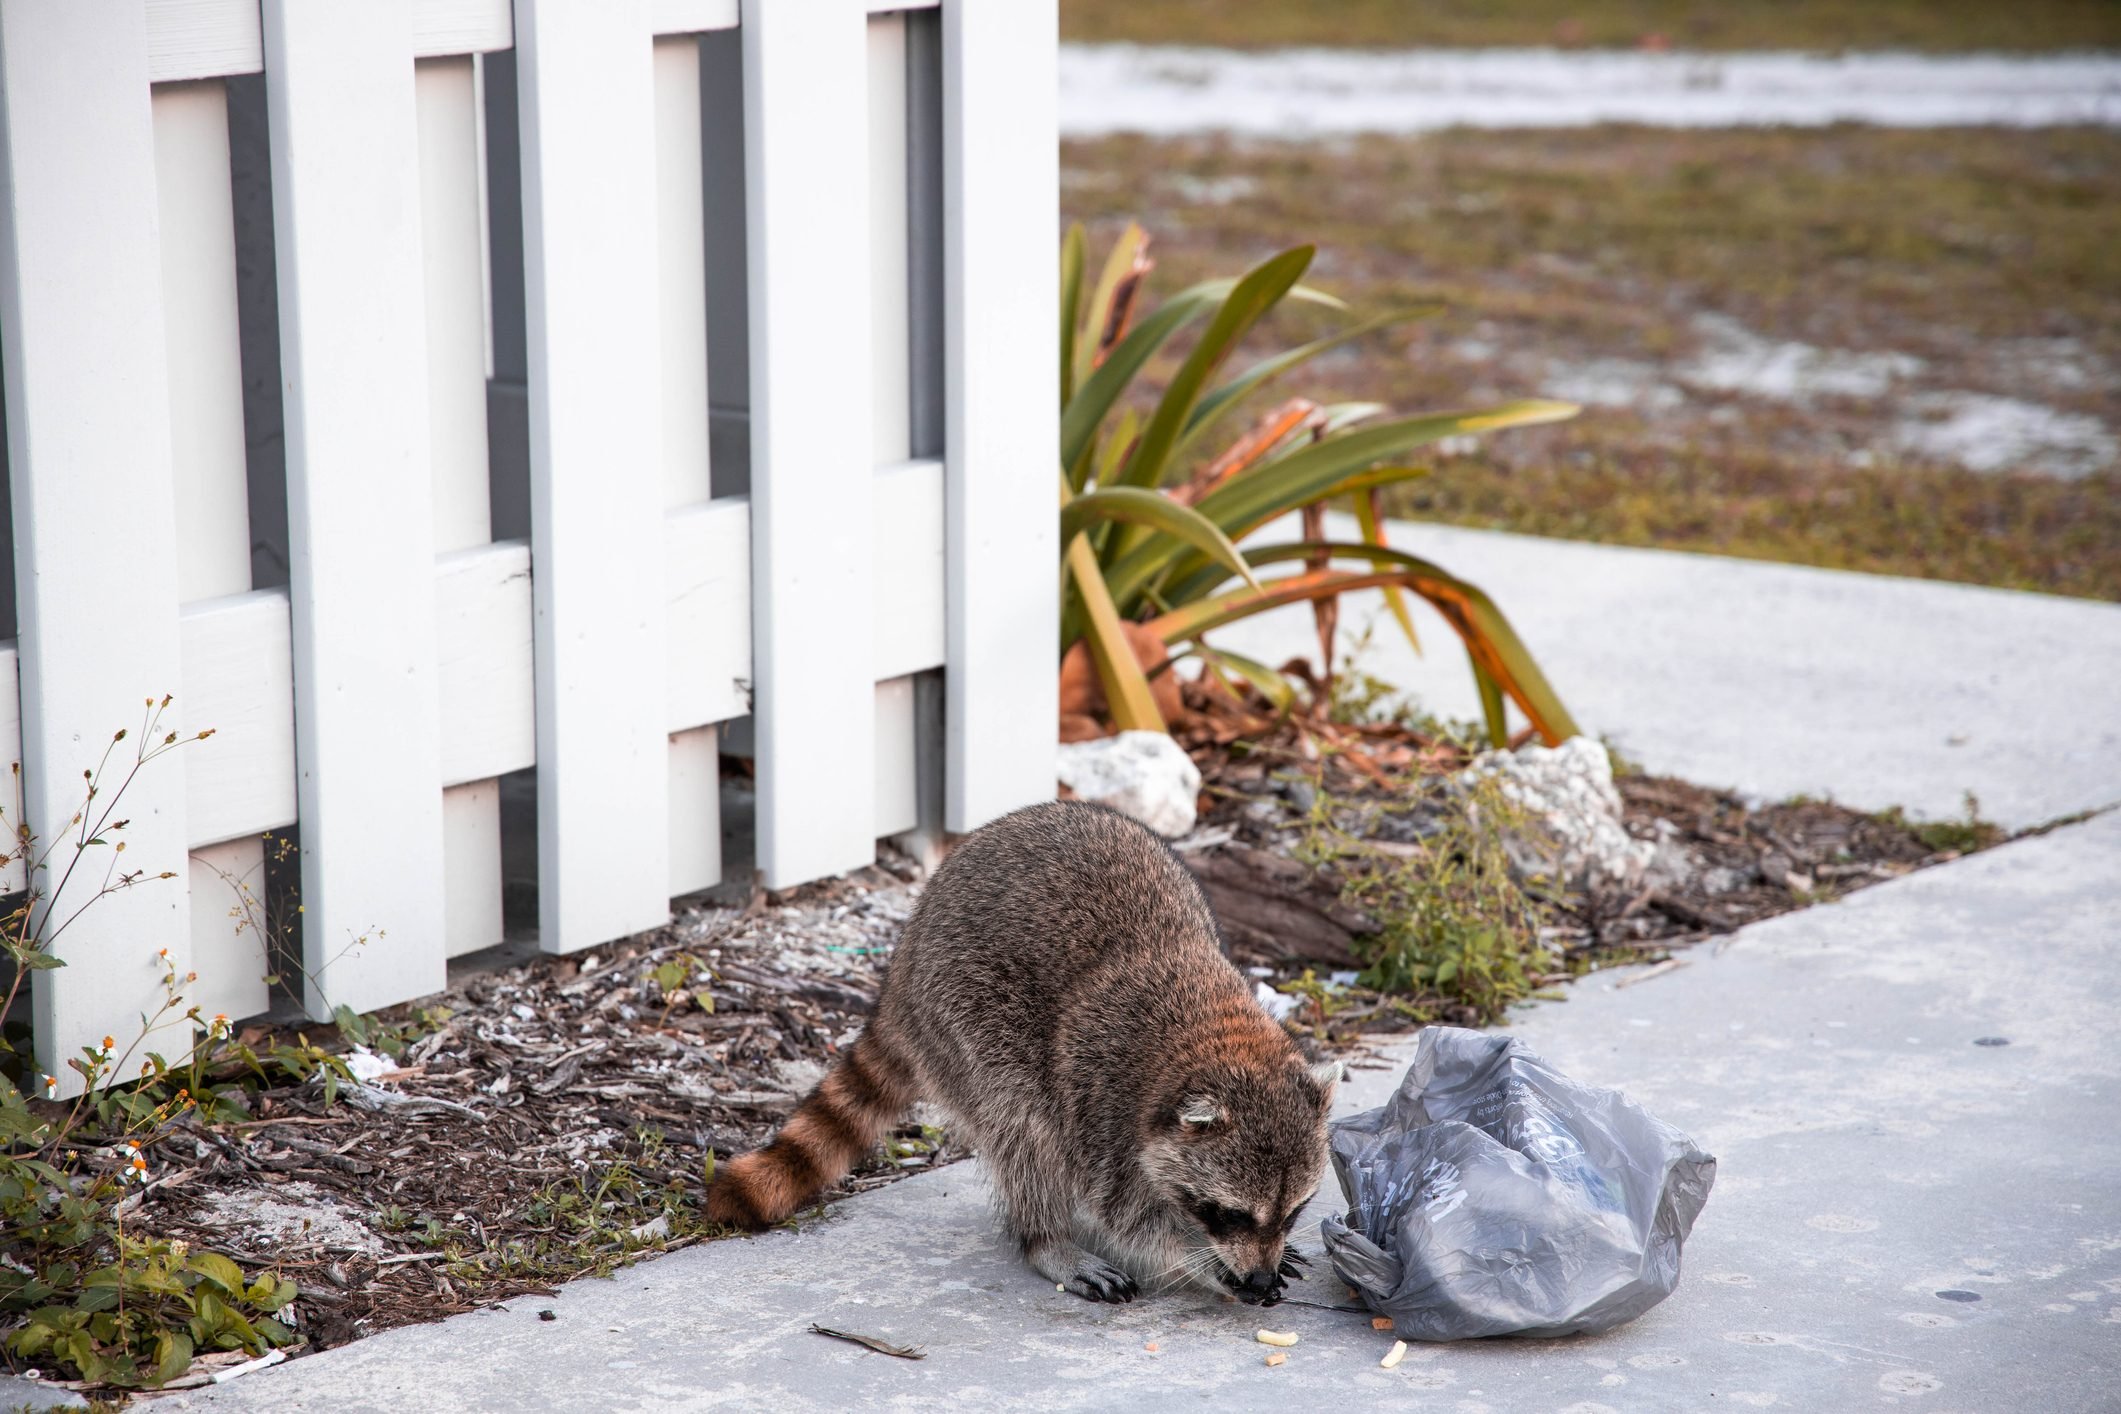 Raccoon stealing food from trash in the Key Biscayne state park in the Miami area.